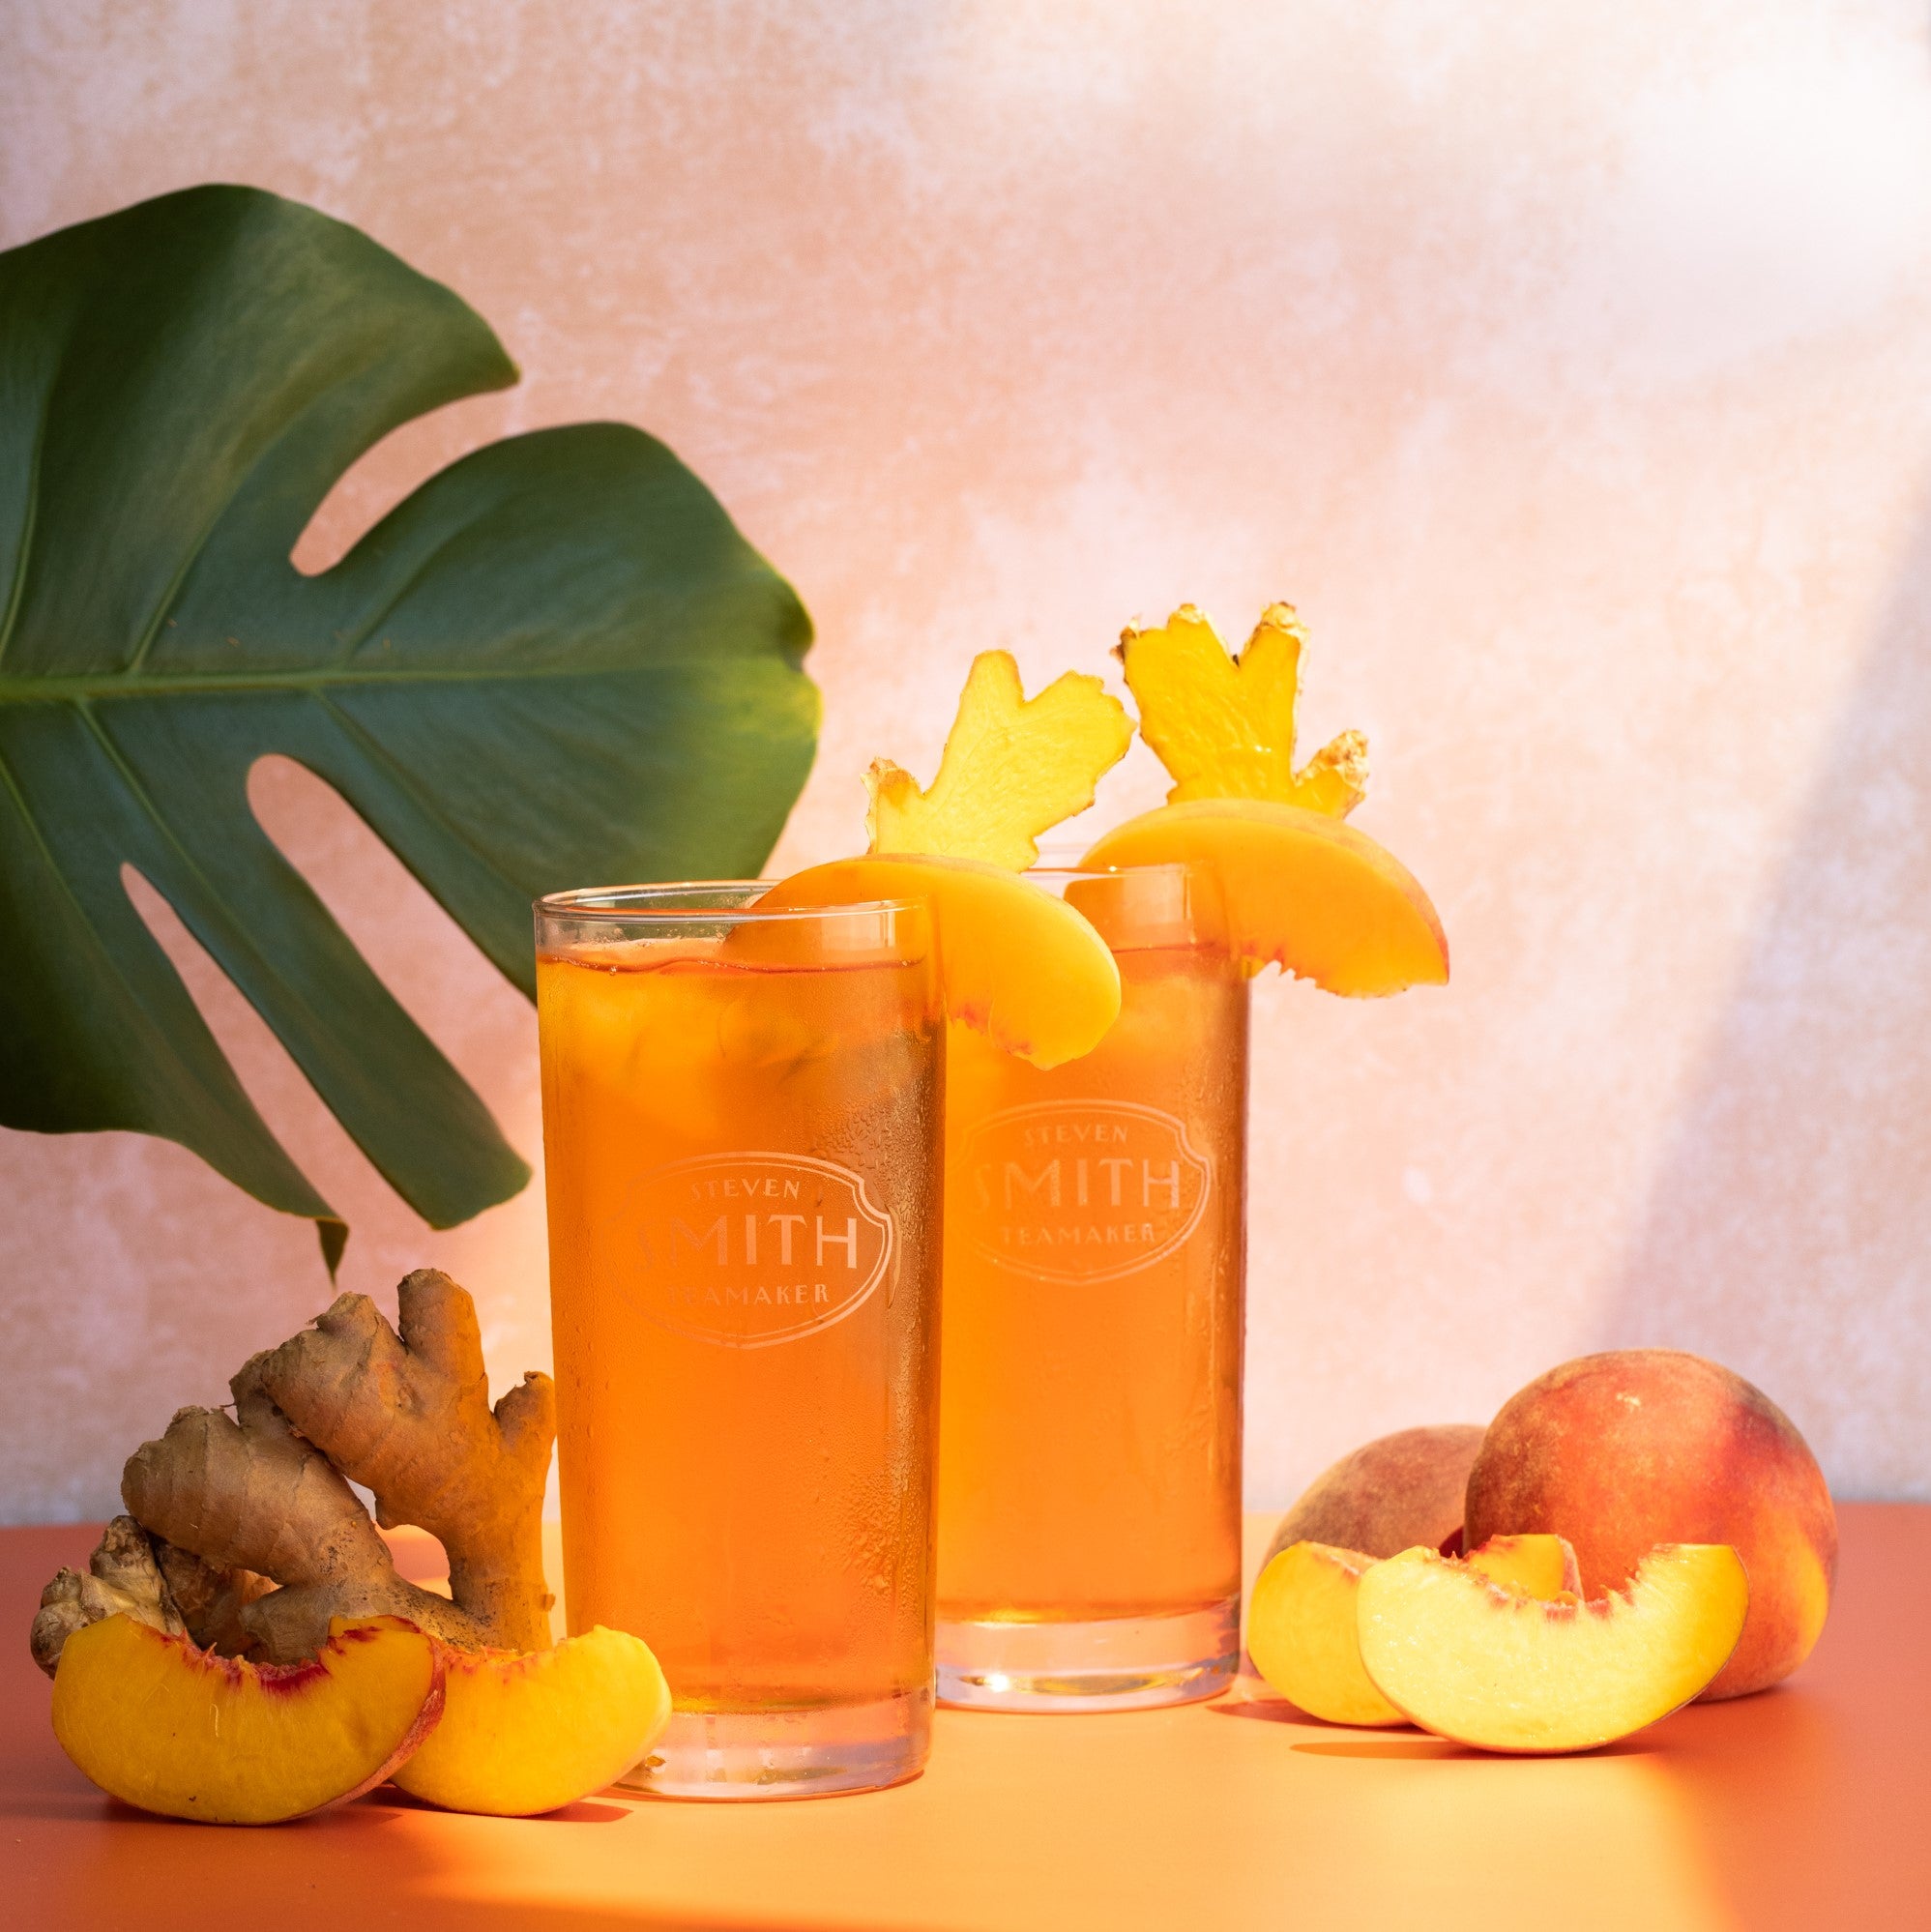 Two glasses of Ginger Peach iced tea against orange background.